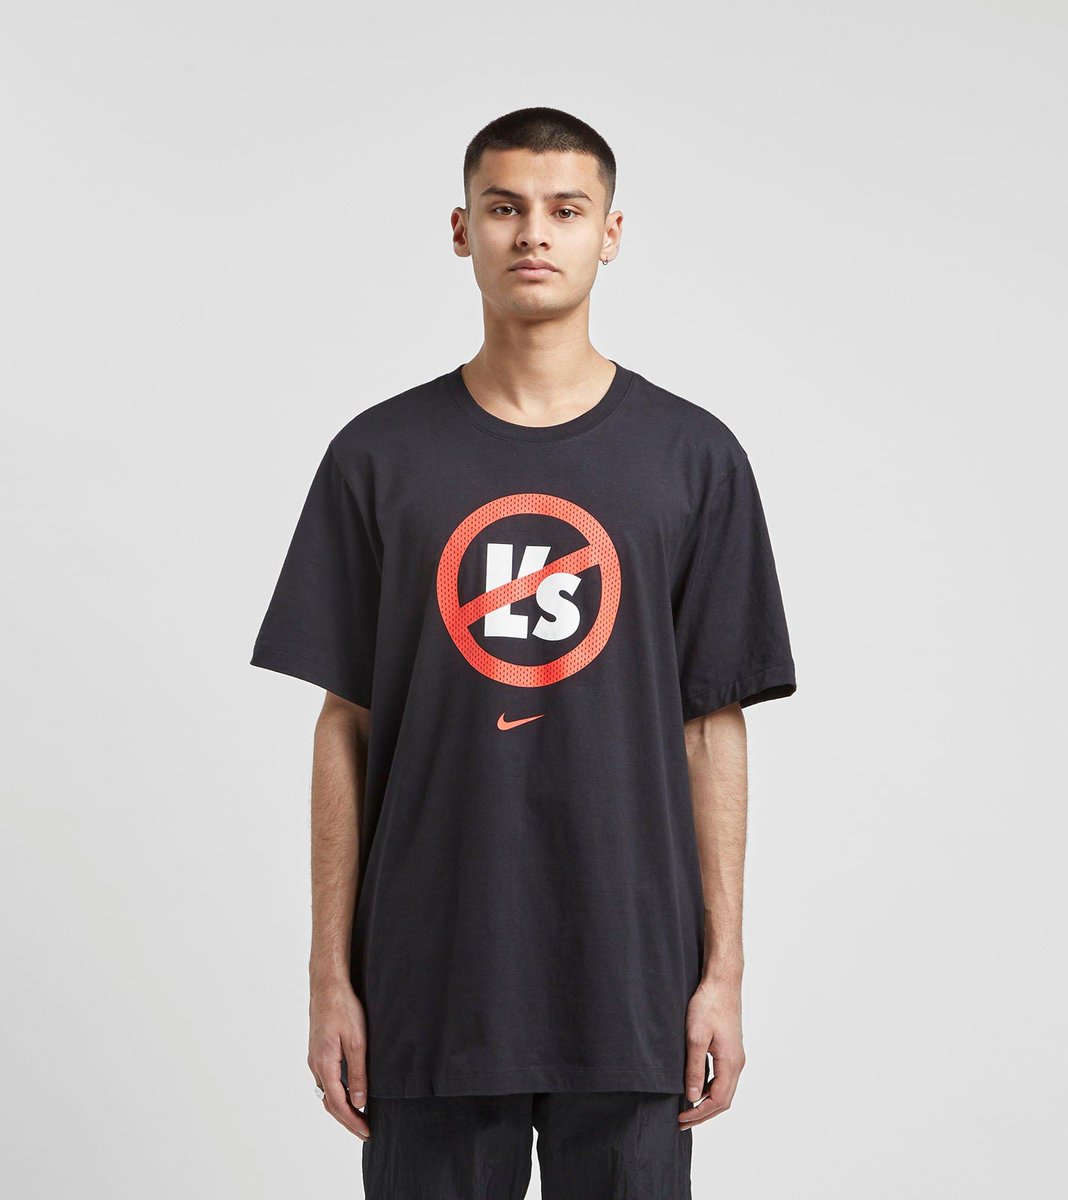 The @Nike No L's T-Shirt. Available 